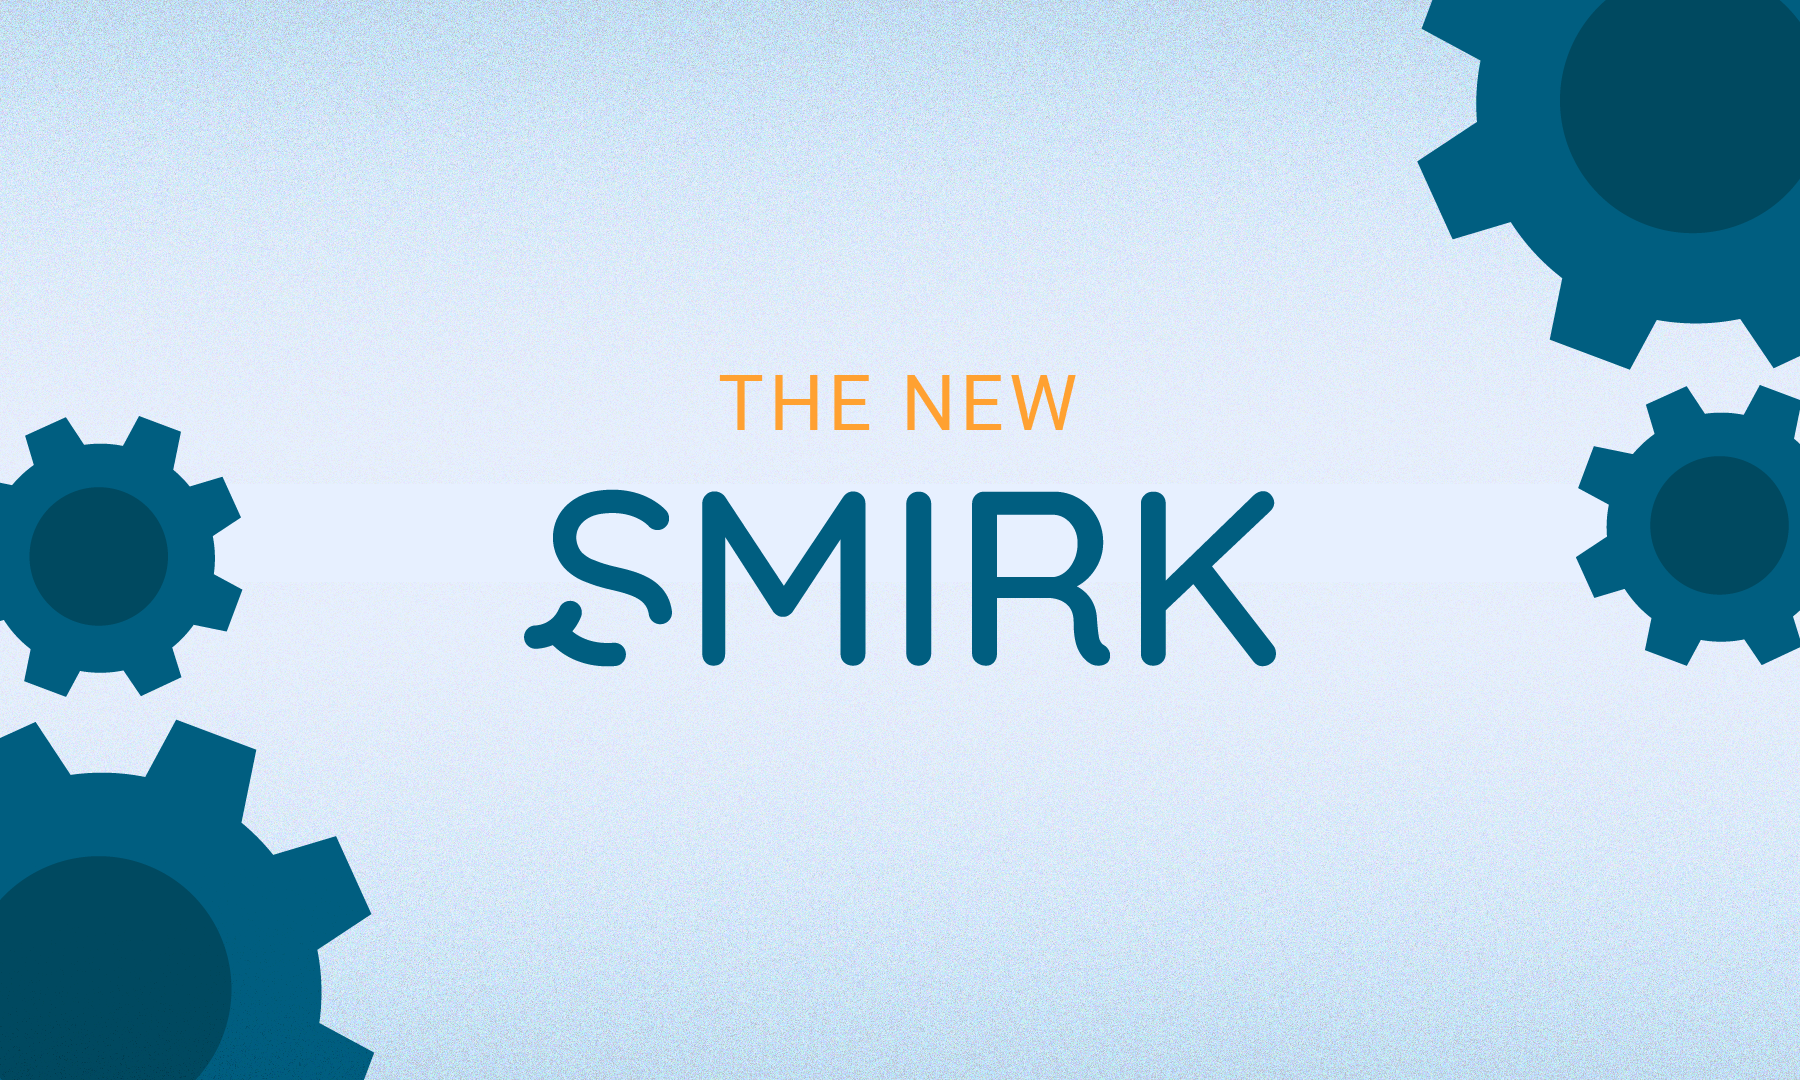 The New Smirk Graphic with Gears